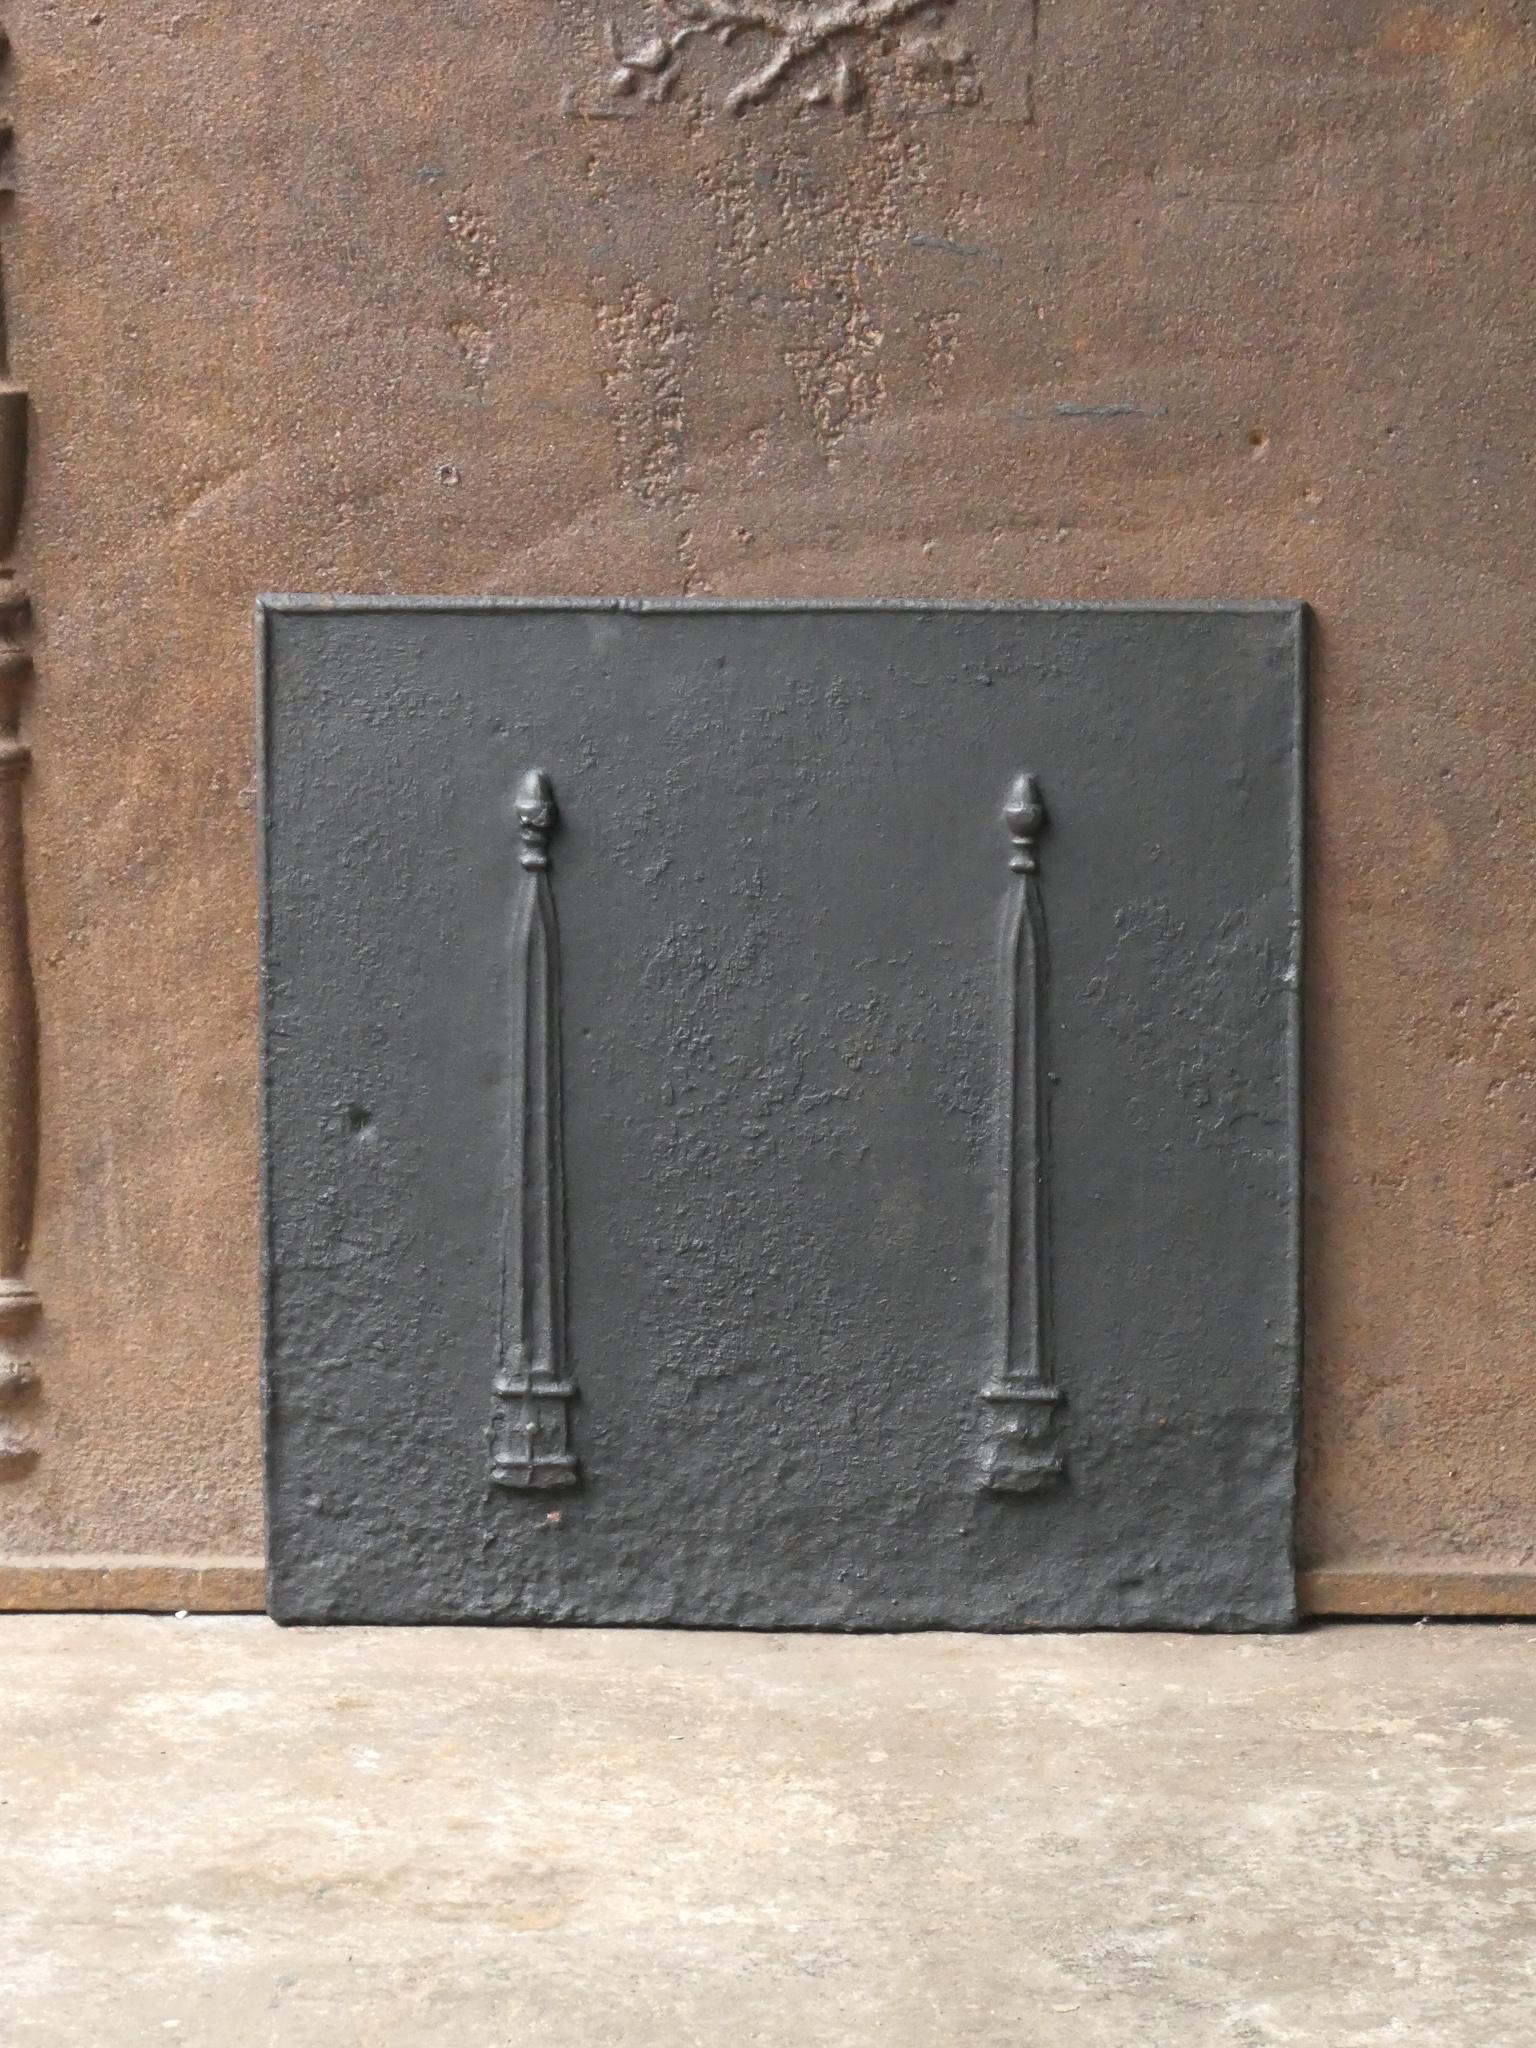 19th century French neoclassical fireback with two pillars of freedom. The pillars symbolize liberty, one of the three values of the French revolution. 

The fireback is made of cast iron and has a black / pewter patina. The fireback is in a good